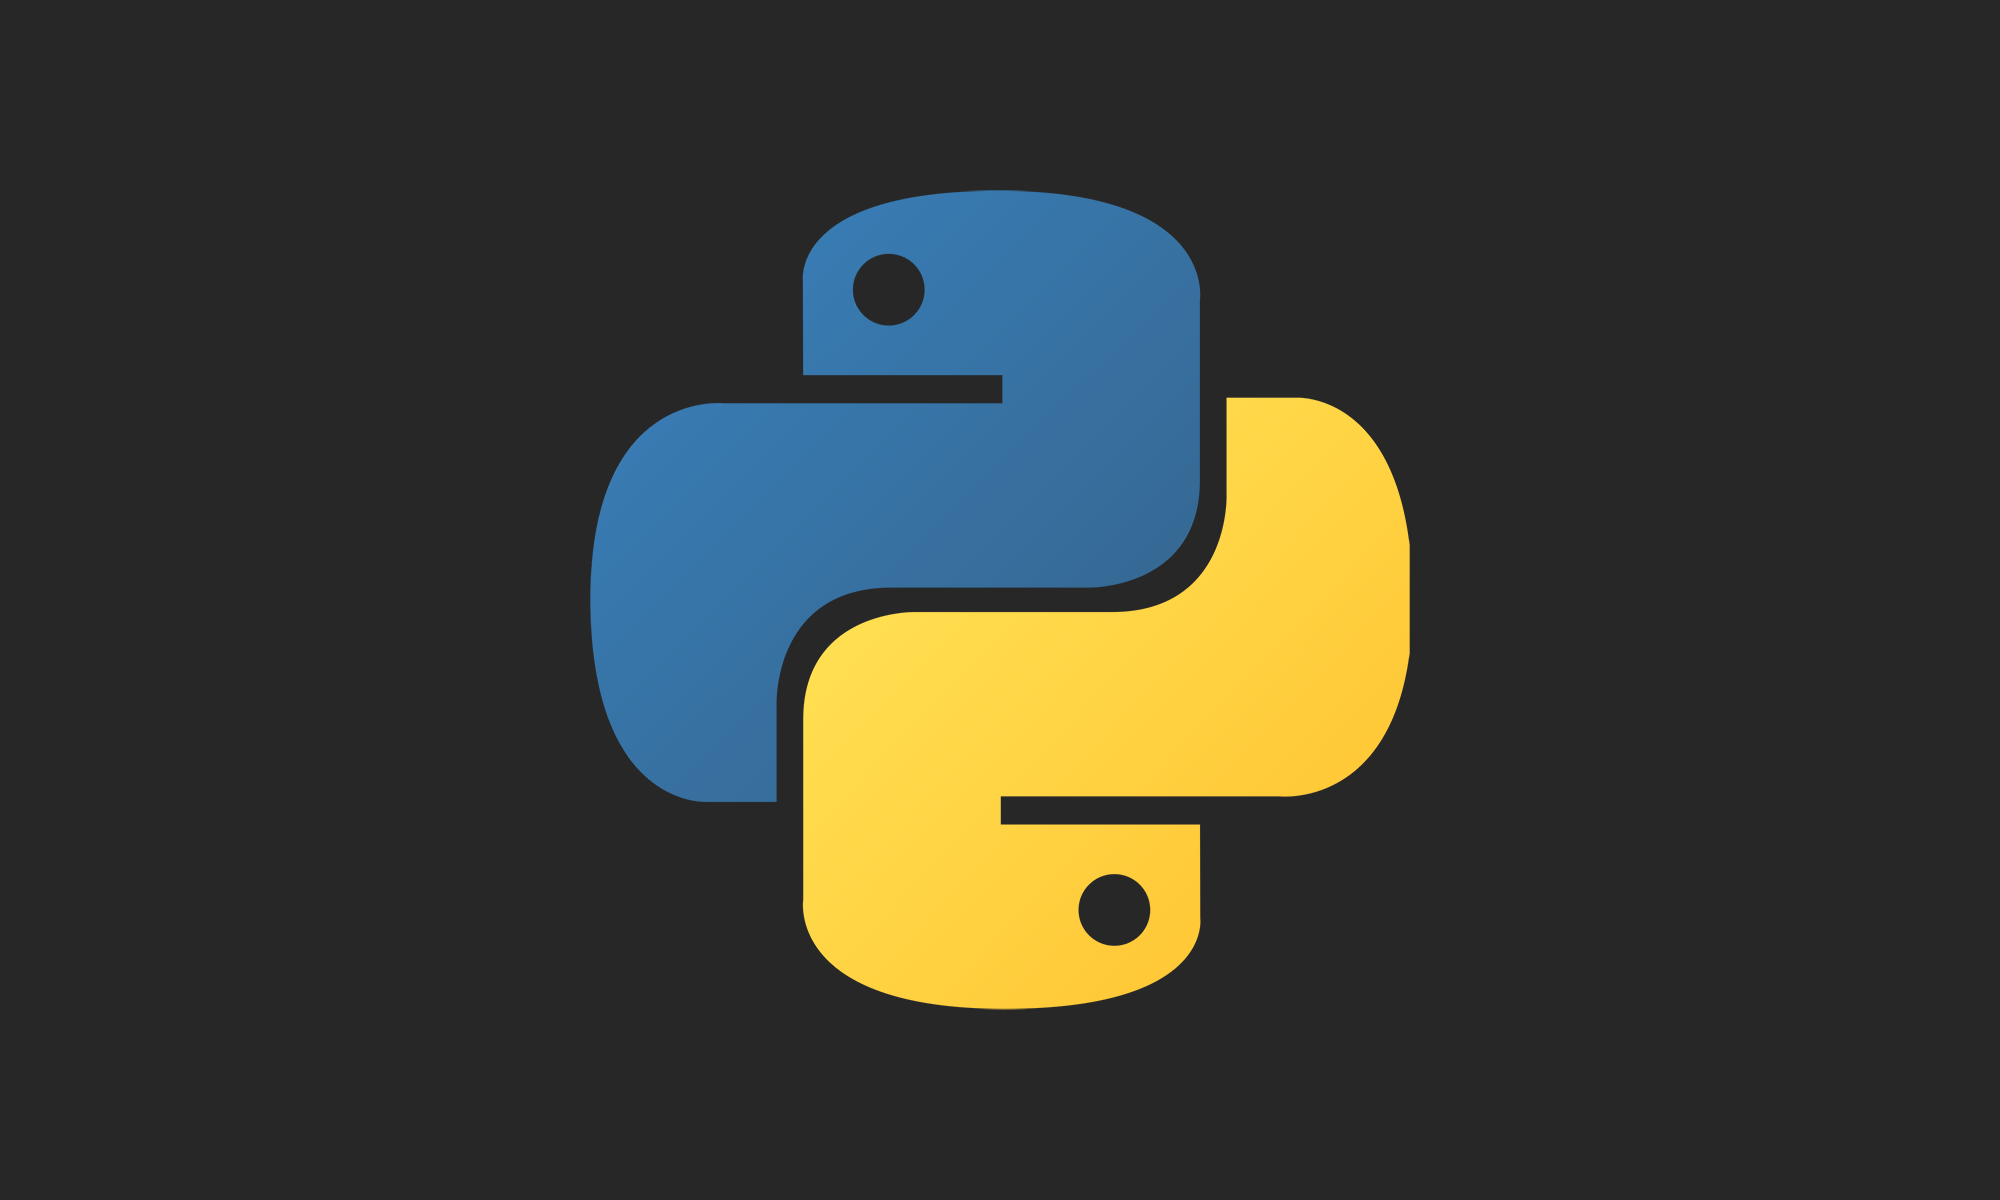 Python: two ways to check if a file exists